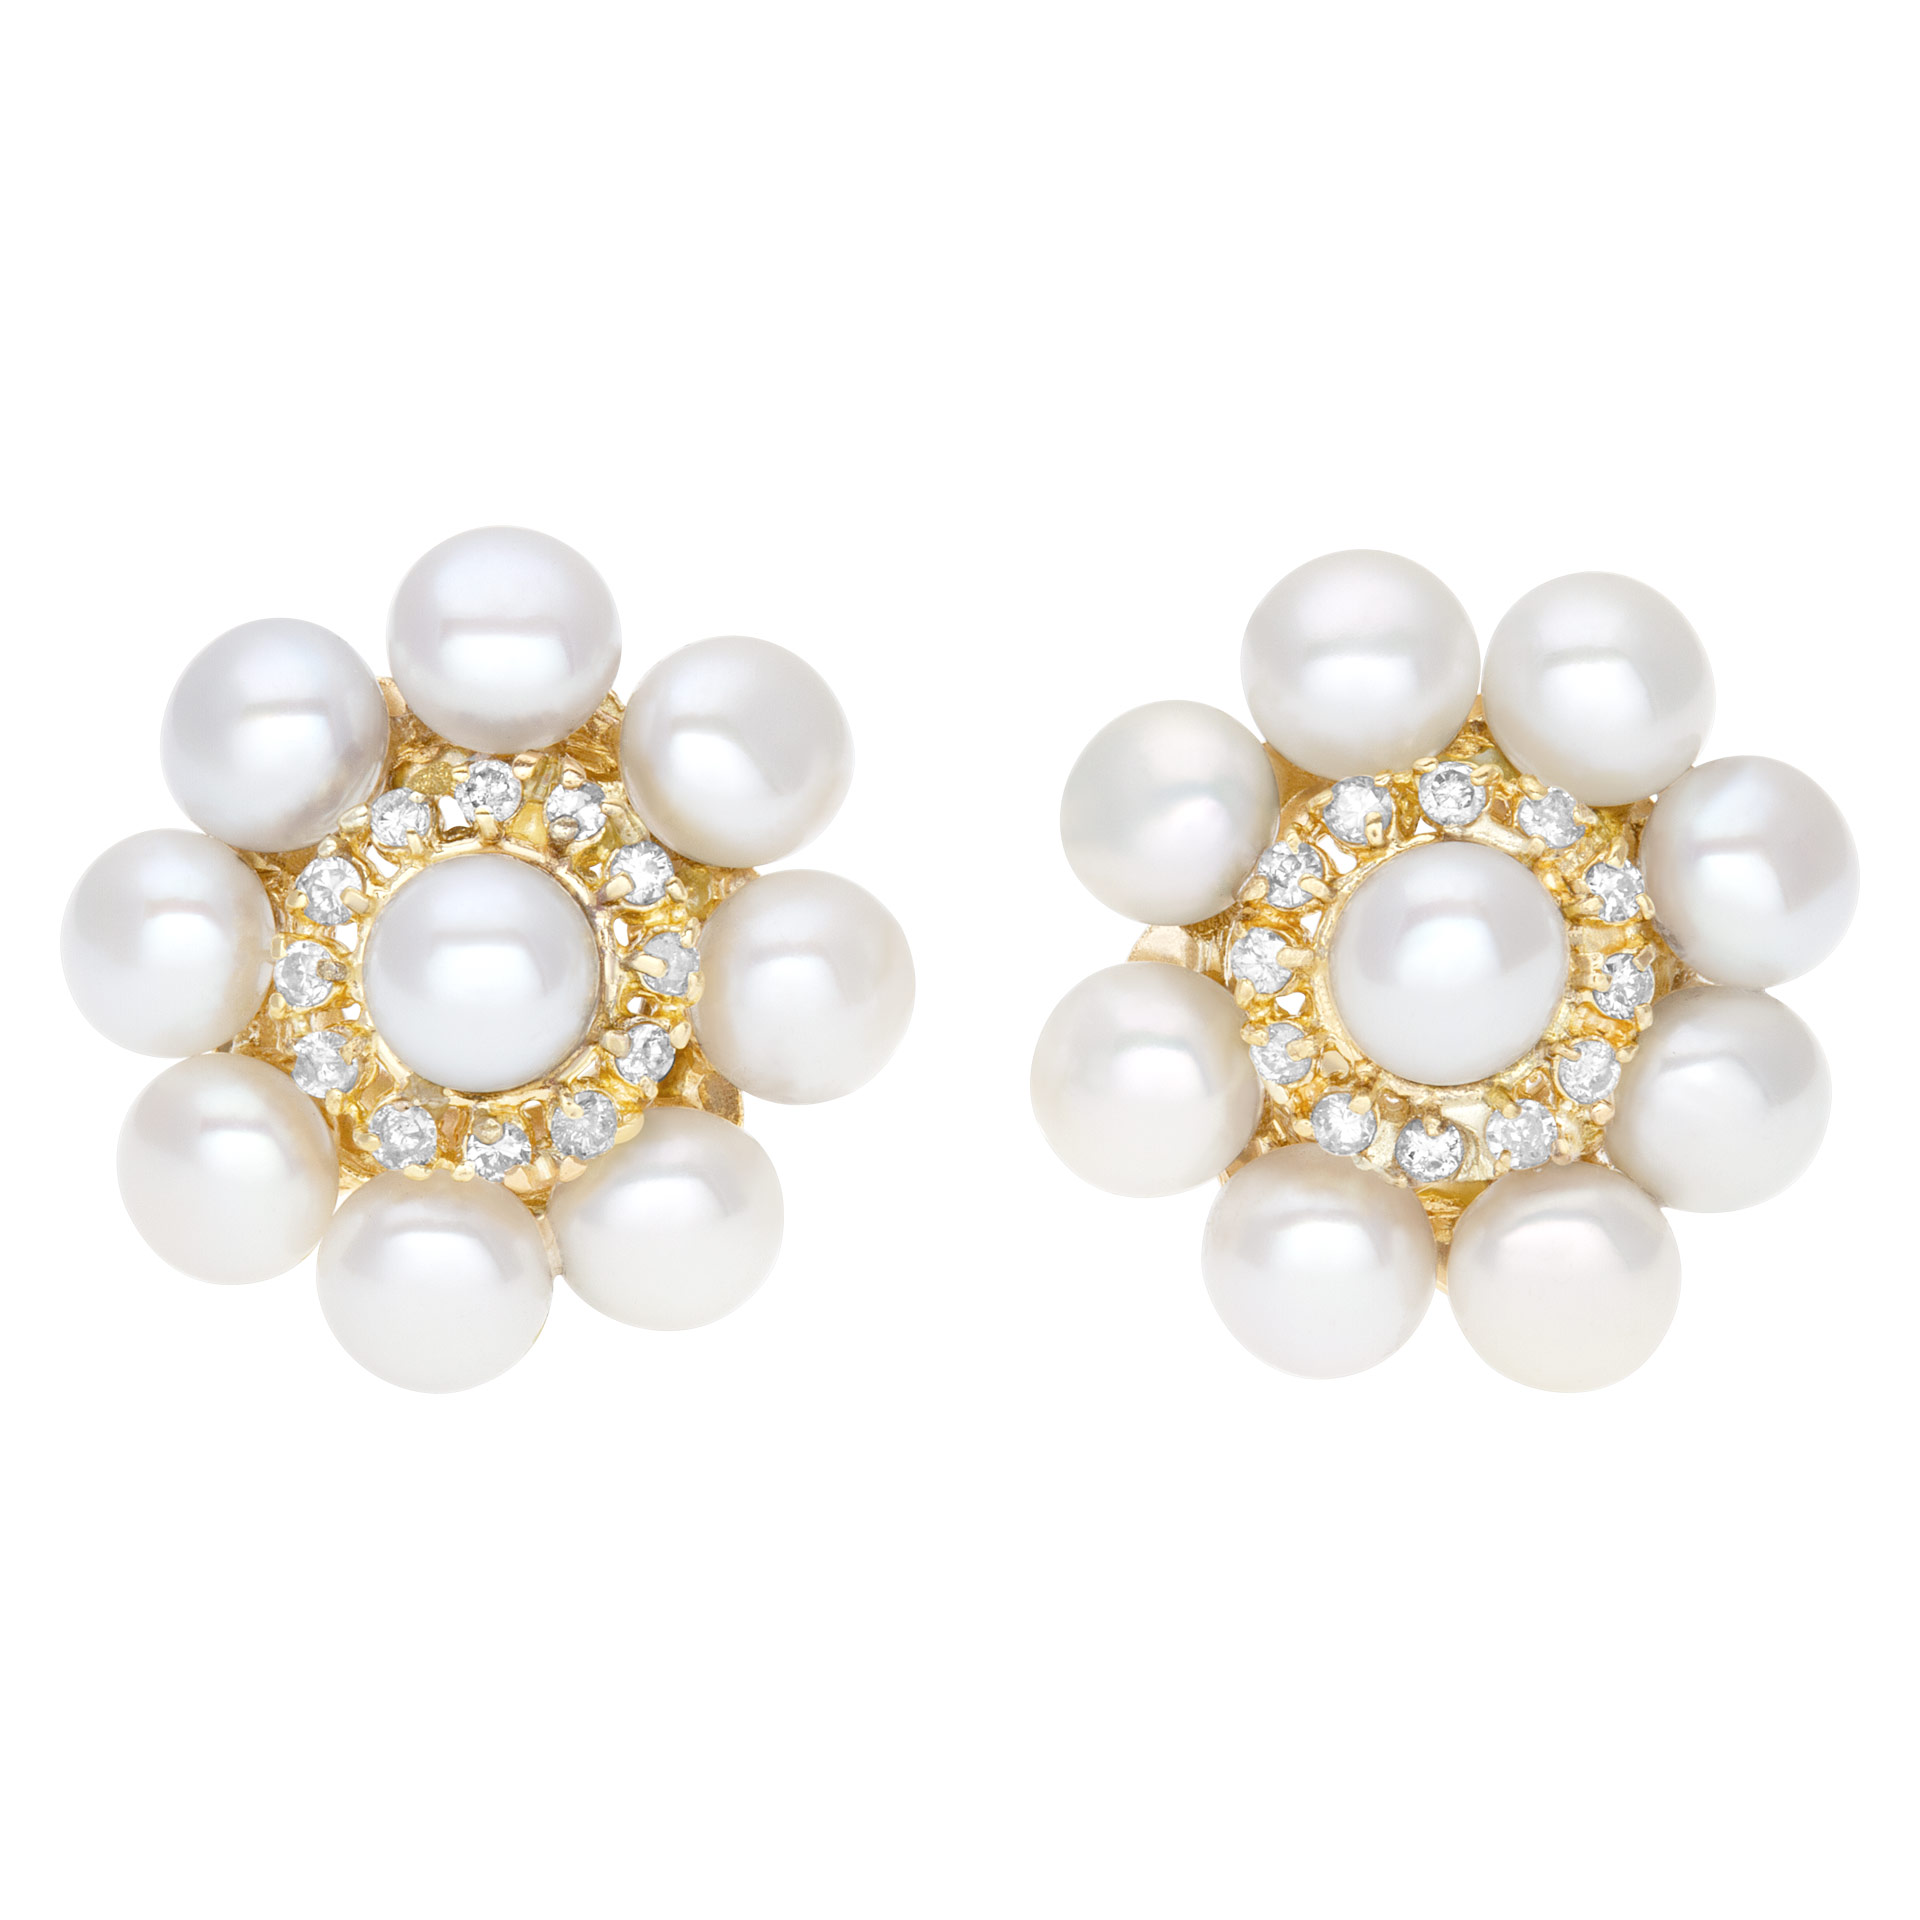 Elegant pair of  pearl earrings (5 x5.5mm) with diamonds accent., set in 18K yellow gold with post and omega clip on. image 1